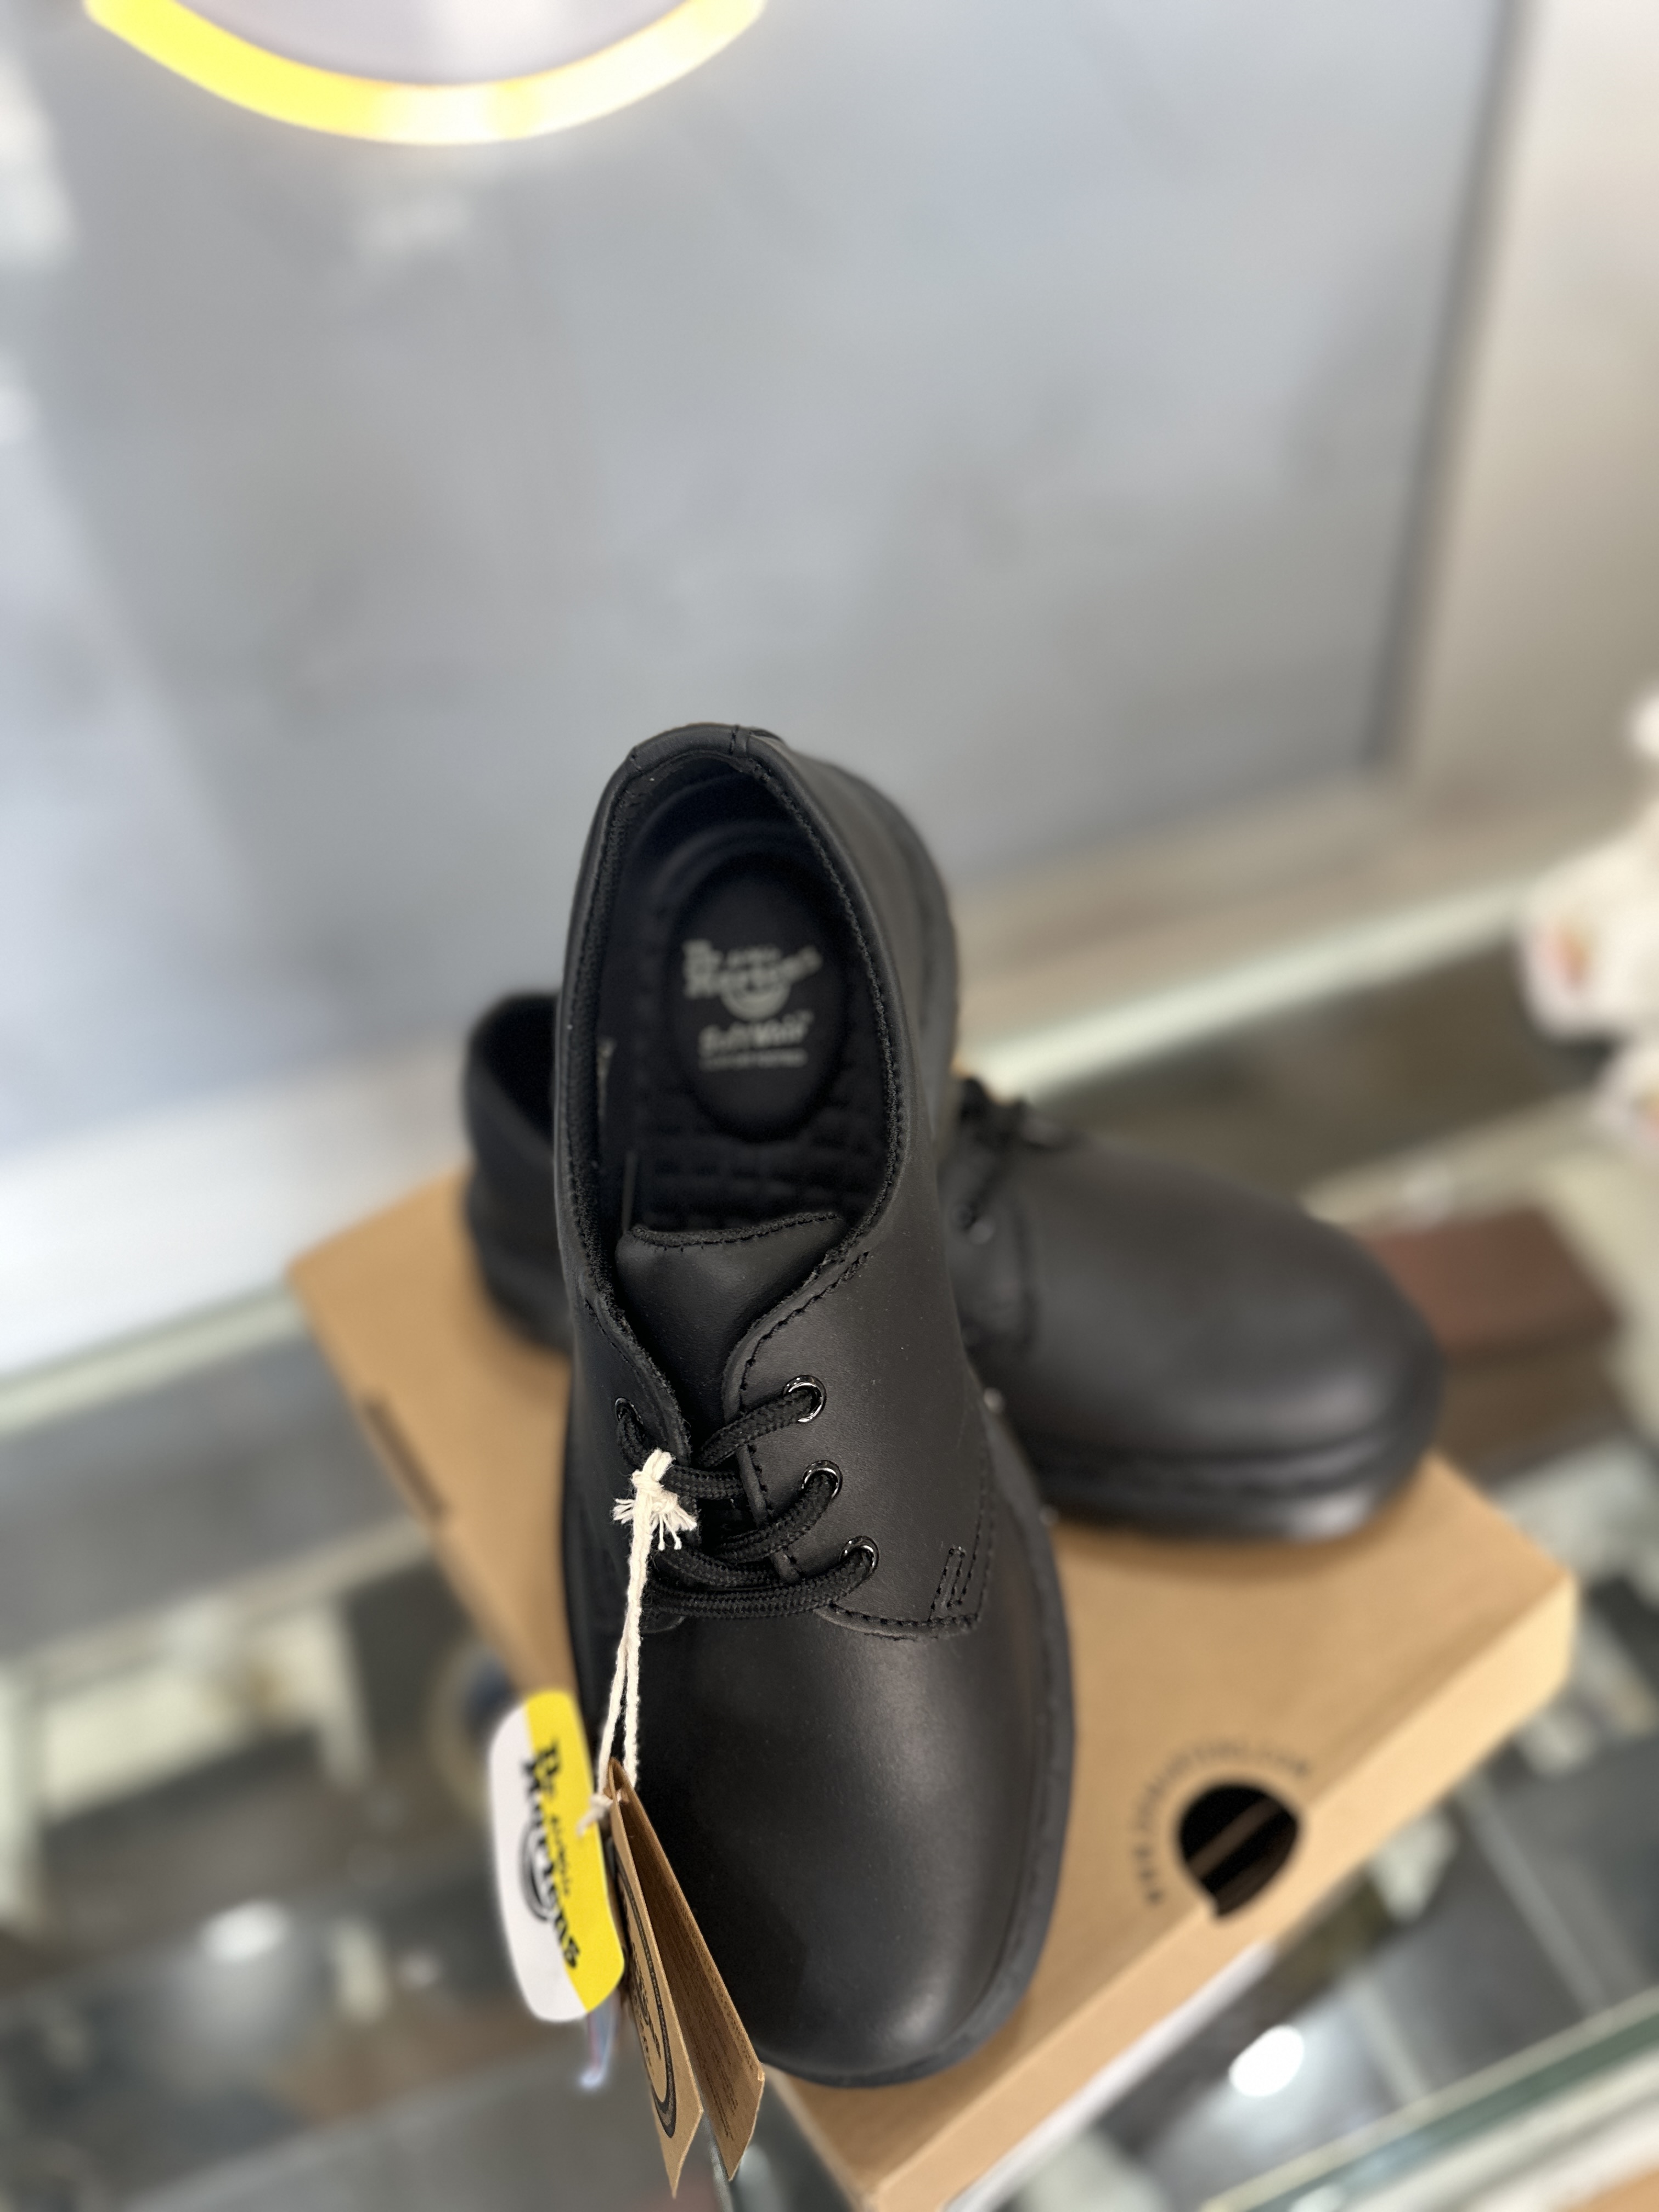 Drmartens 1461 rs